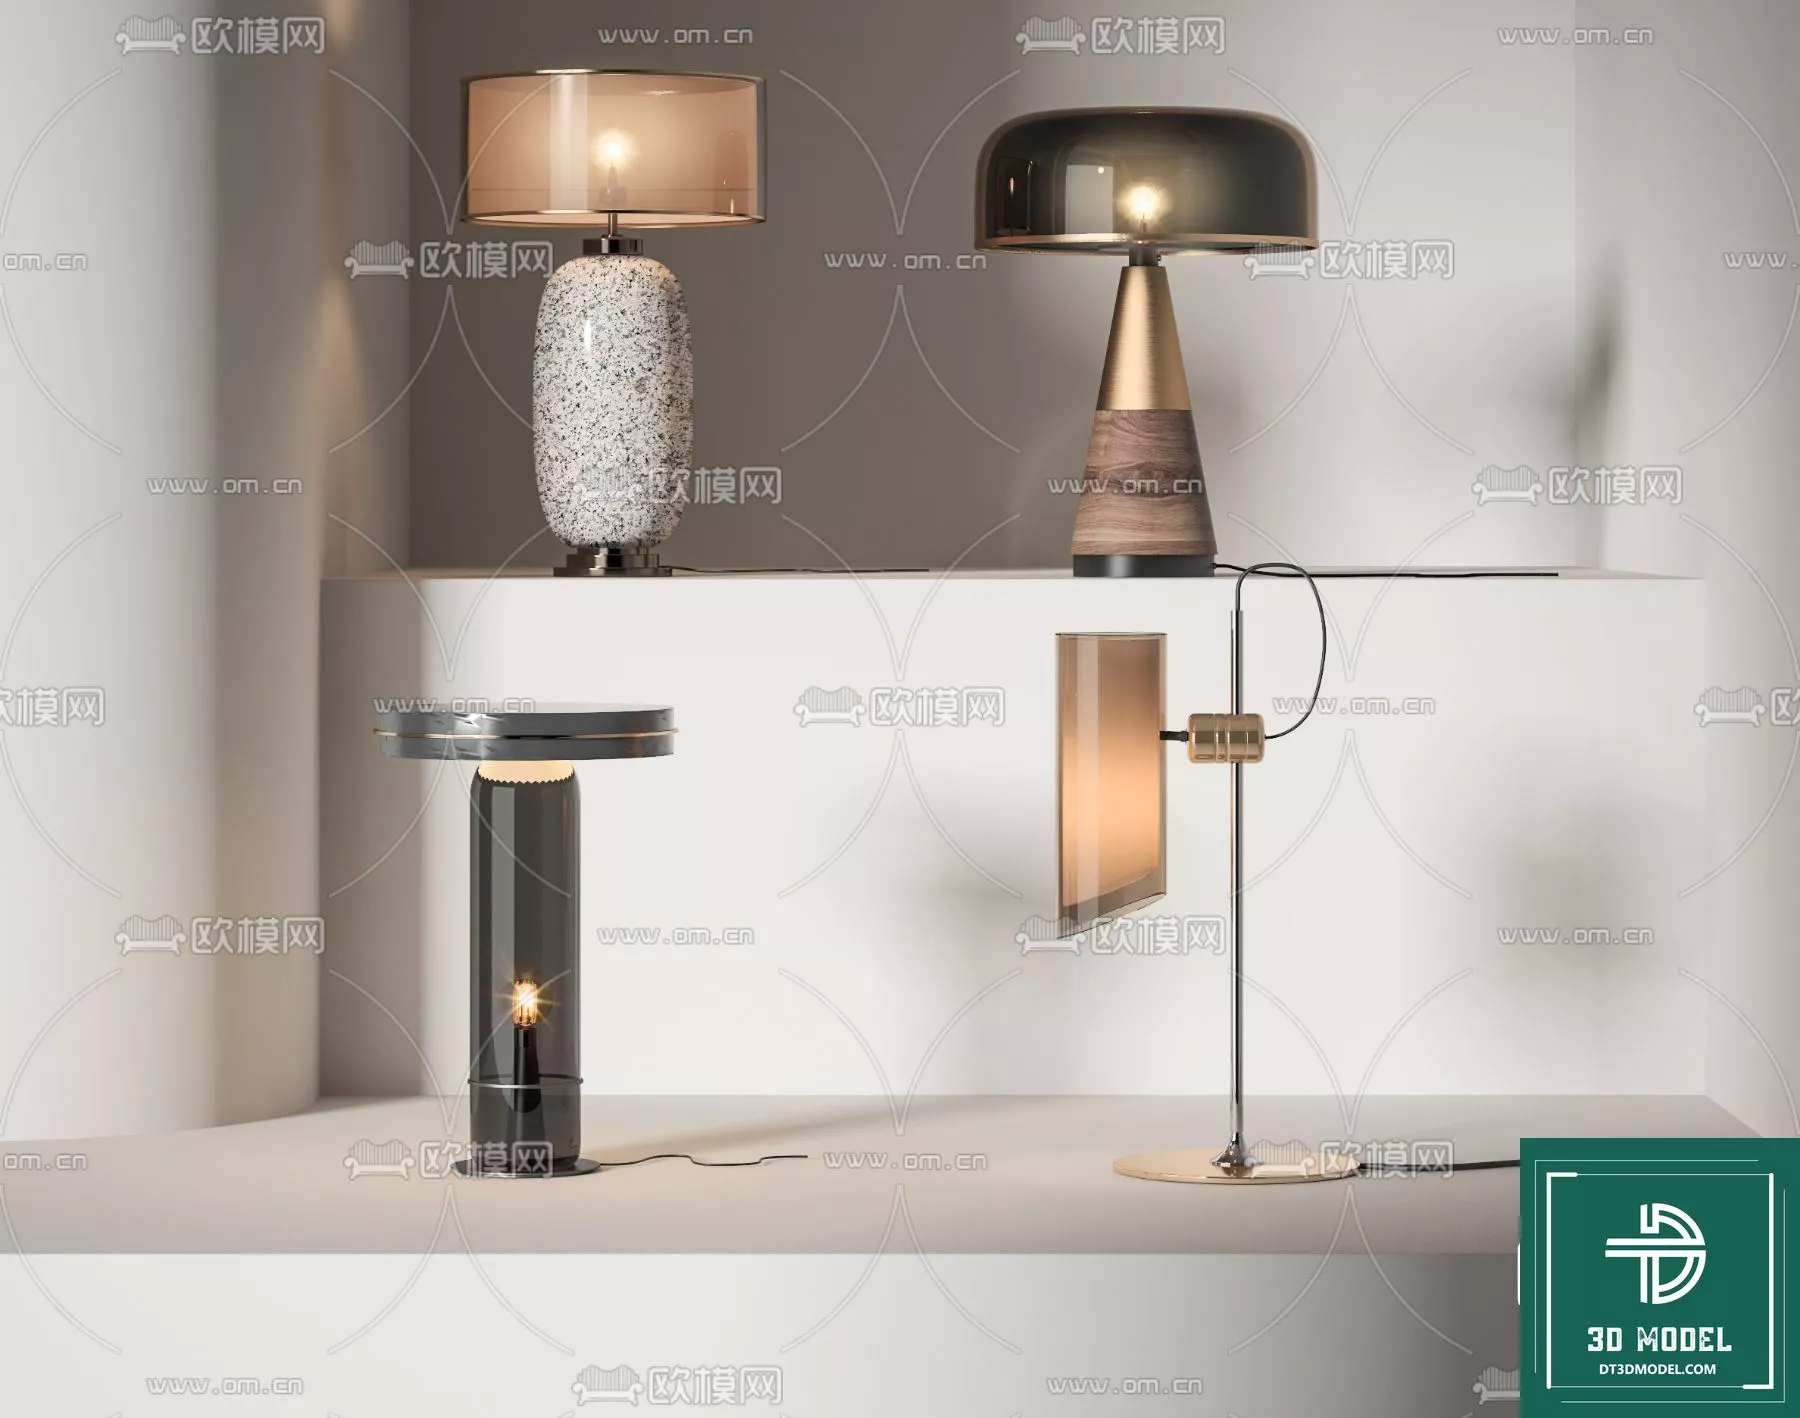 MODERN TABLE LAMP - SKETCHUP 3D MODEL - VRAY OR ENSCAPE - ID14475